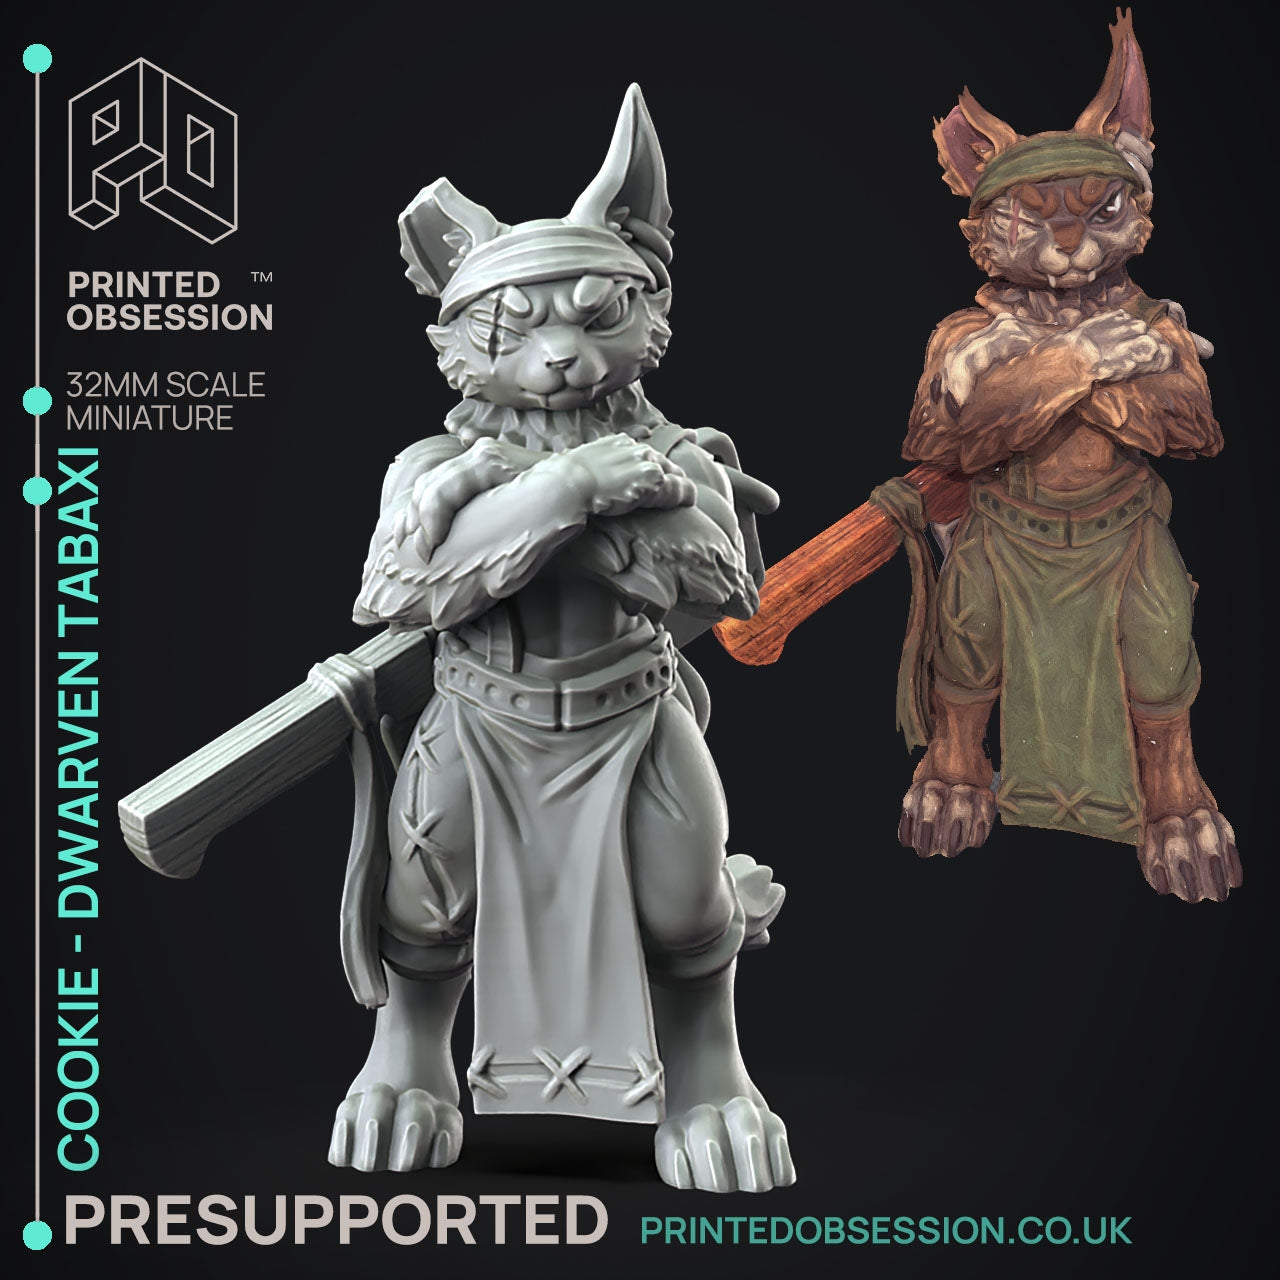 Dwarf Tabaxi Cookie - The Printed Obsession - Table-top mini, 3D Printed Collectable for painting and playing!